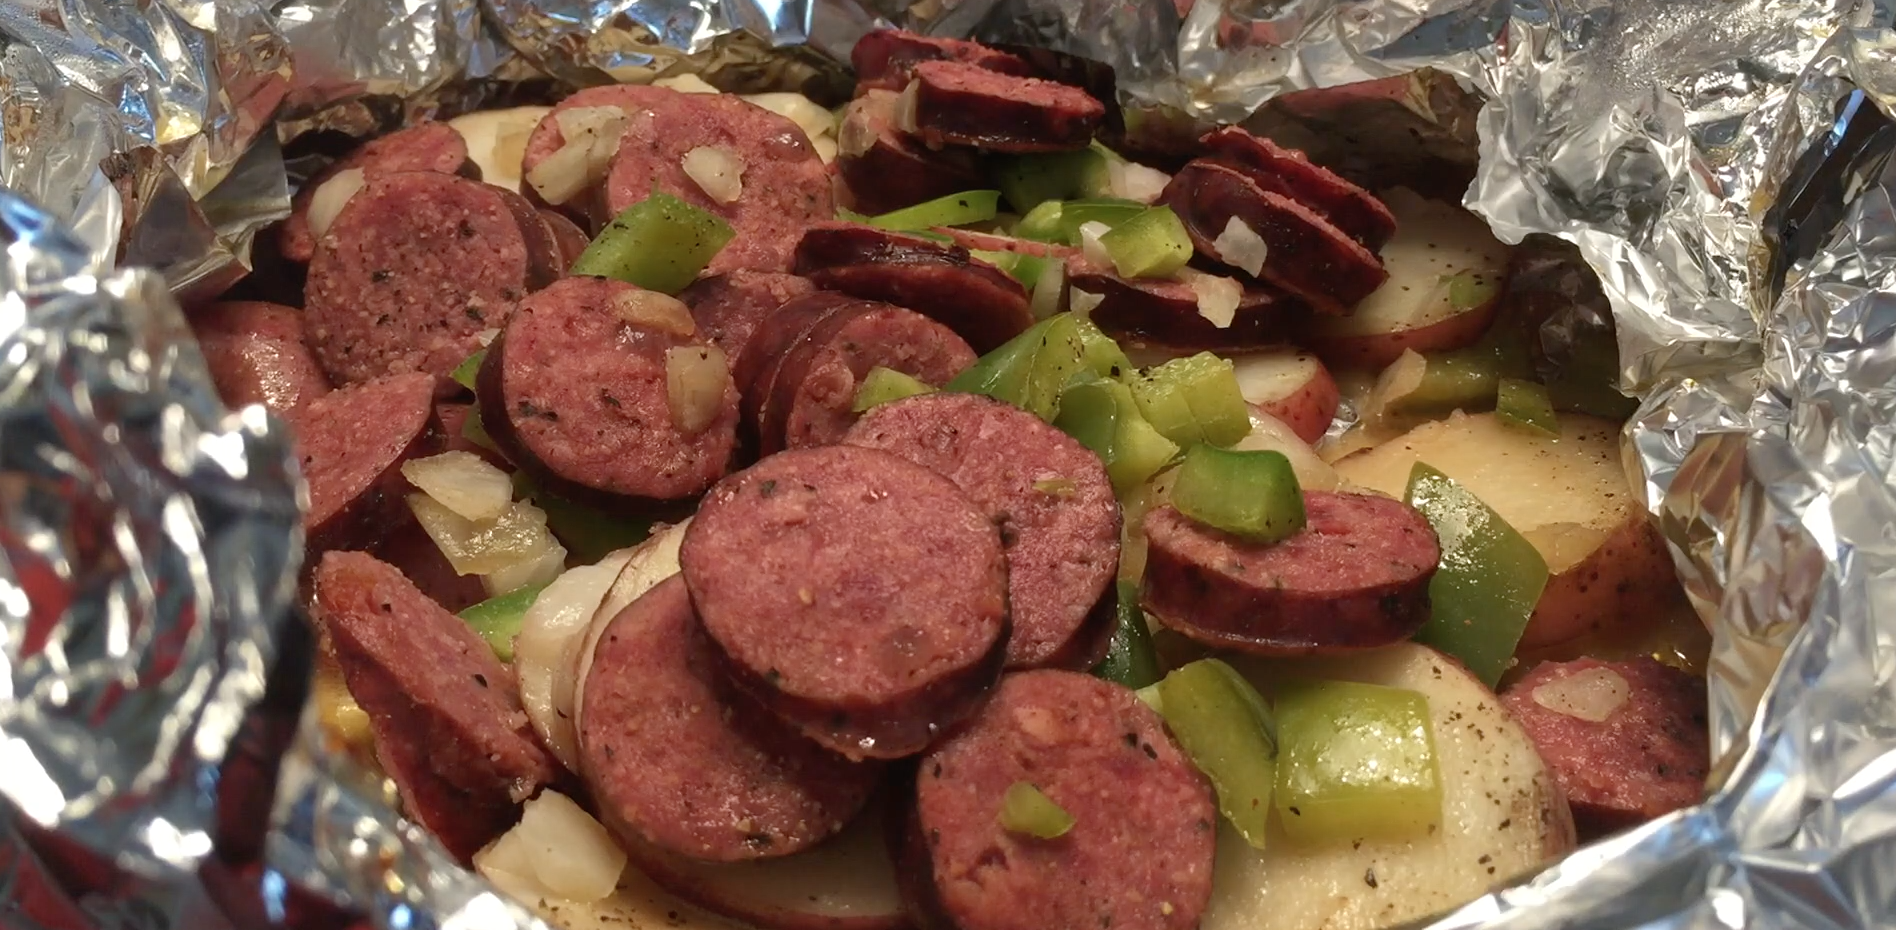 Red potatoes, green peppers, onion, sausage, butter, pepper and salt in tinfoil